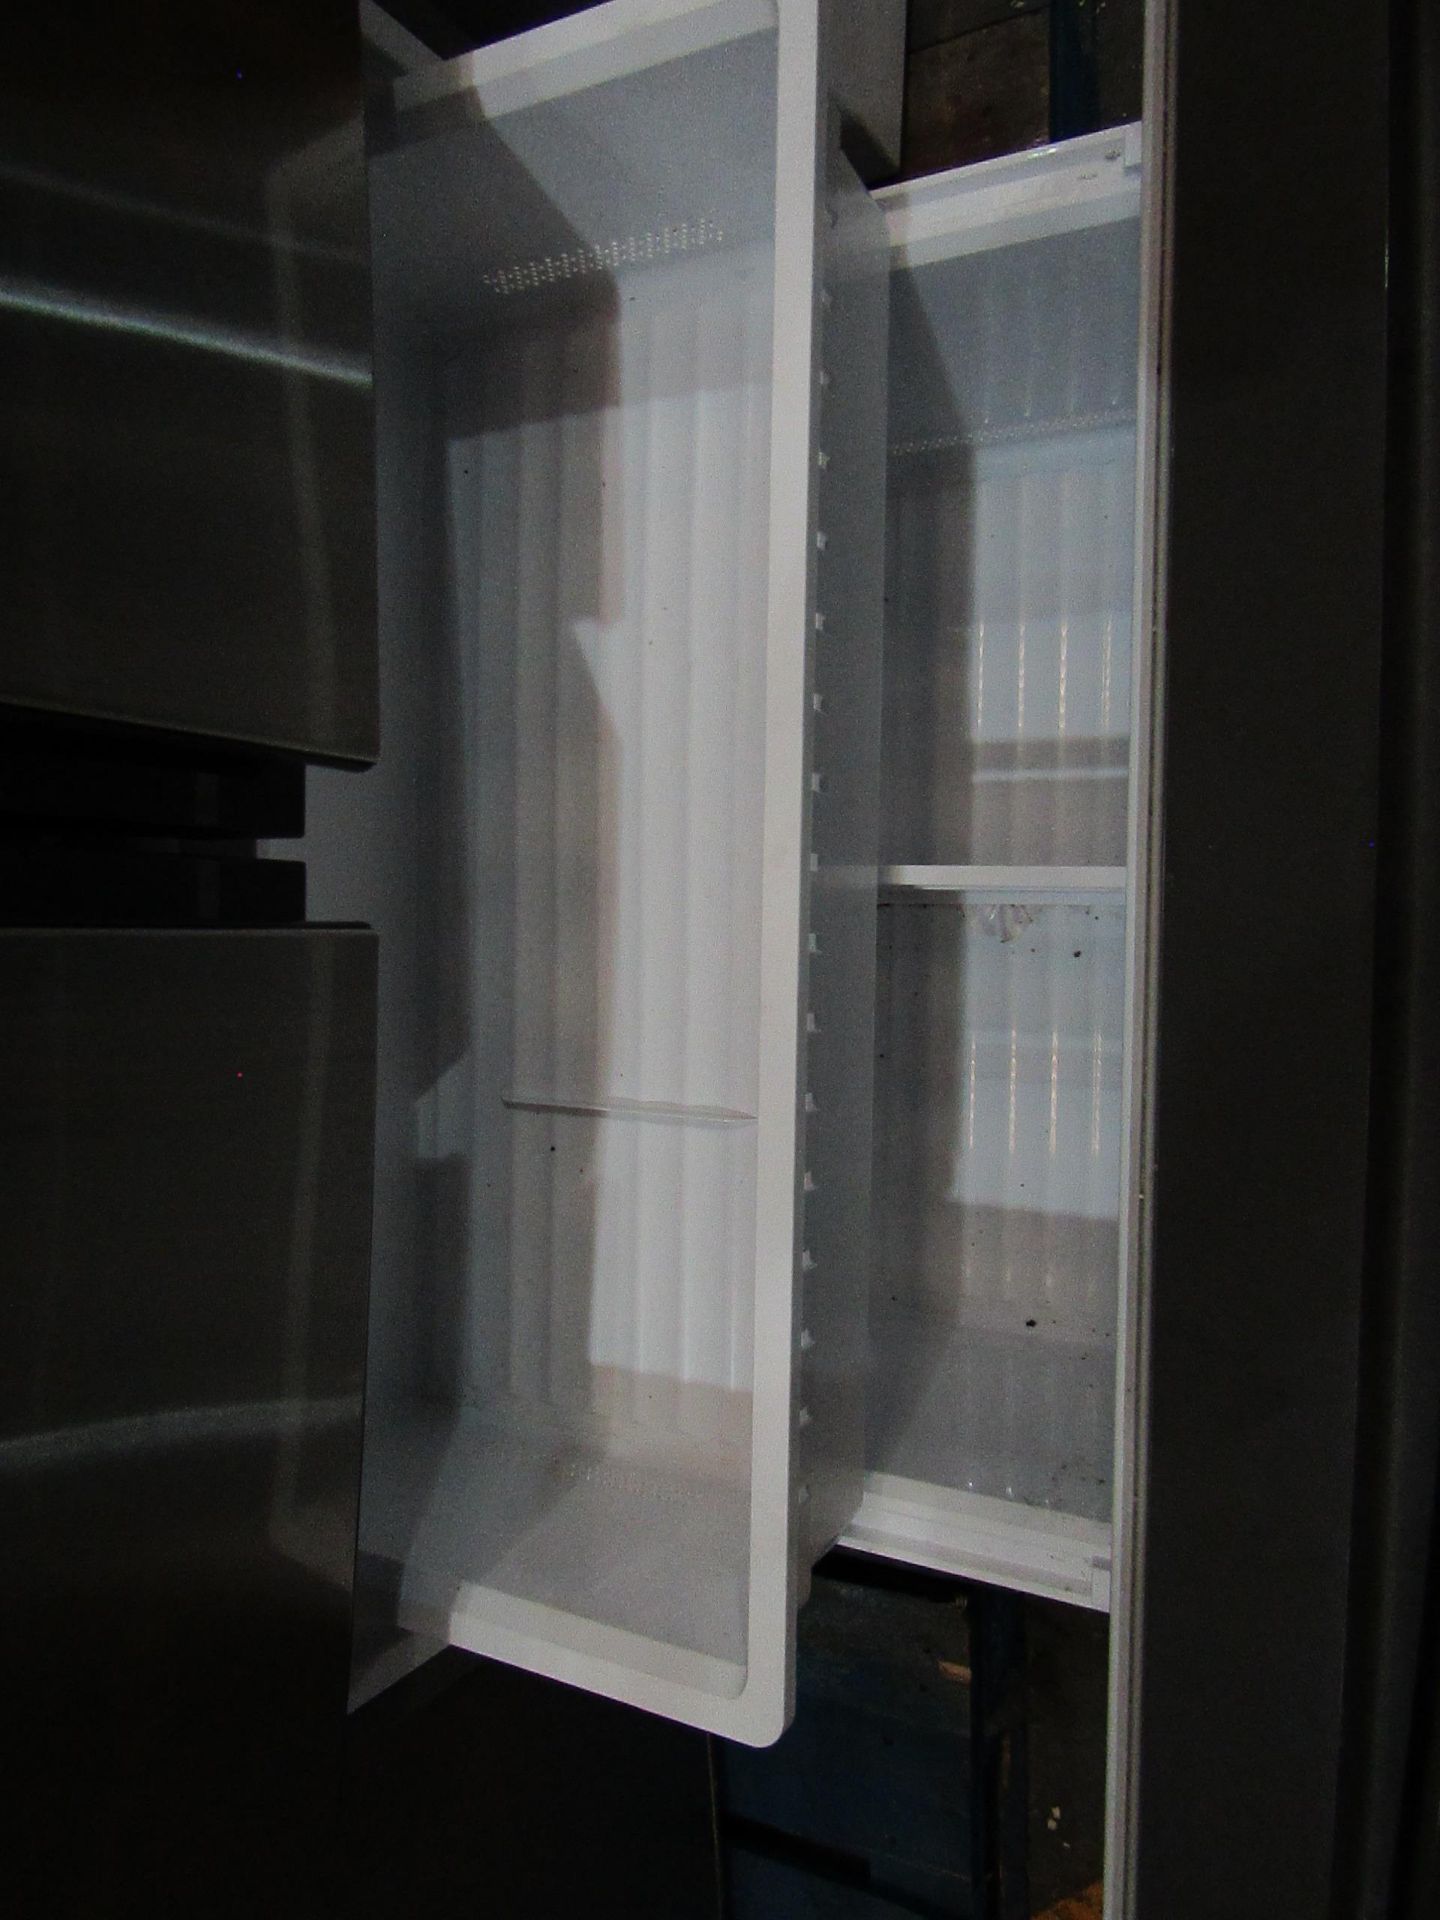 Hisense RF750N 3 door American fridge freezer with ice and water dispenser, tested and working for - Image 3 of 4